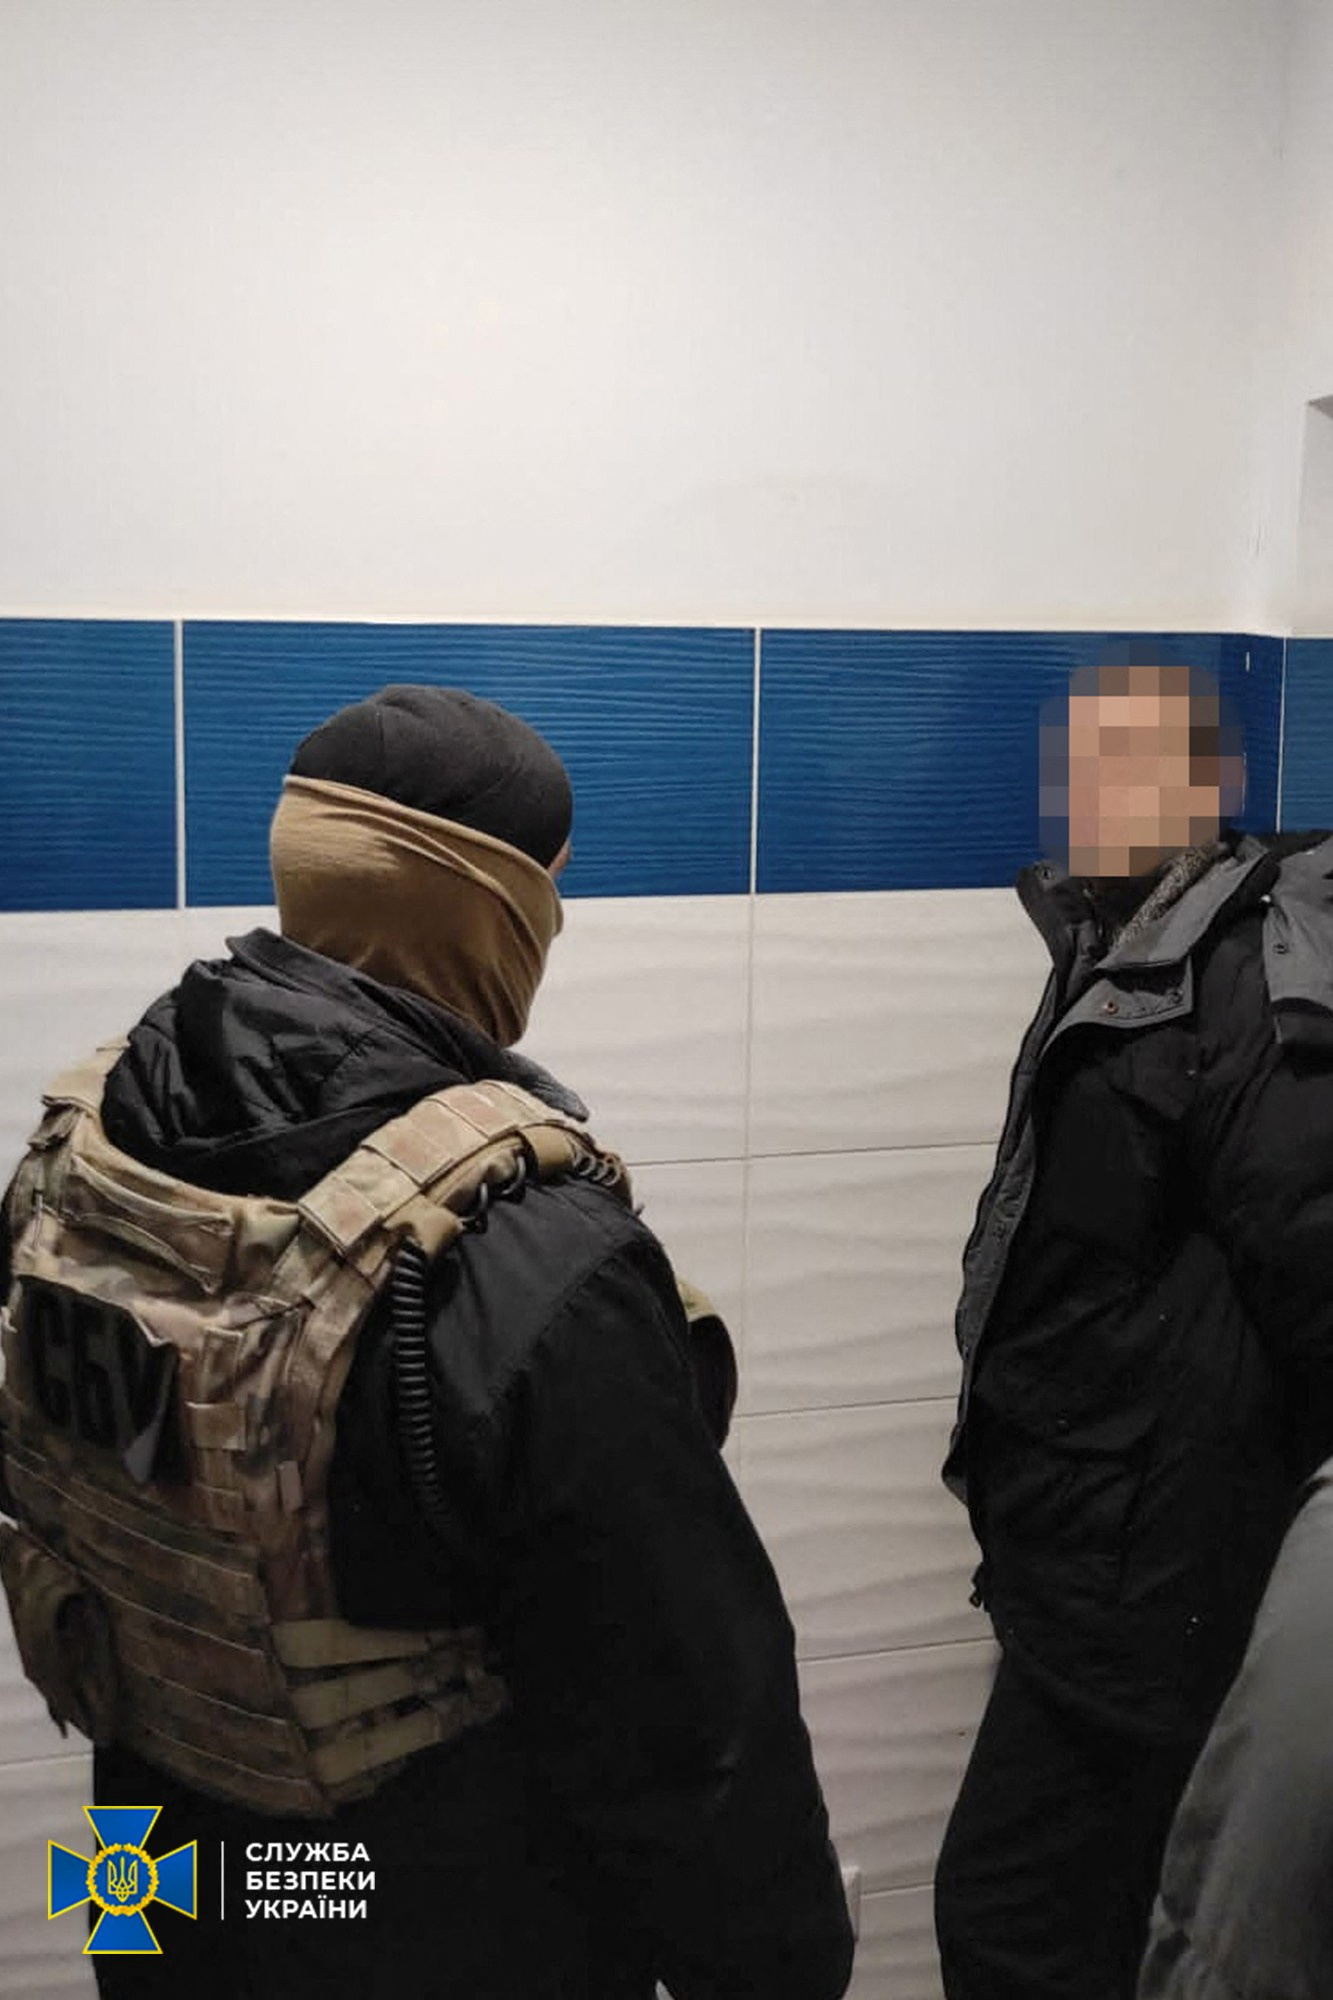 A man who, according to the State Security Service of Ukraine, is a Russian military intelligence agent, is detained in an unknown location